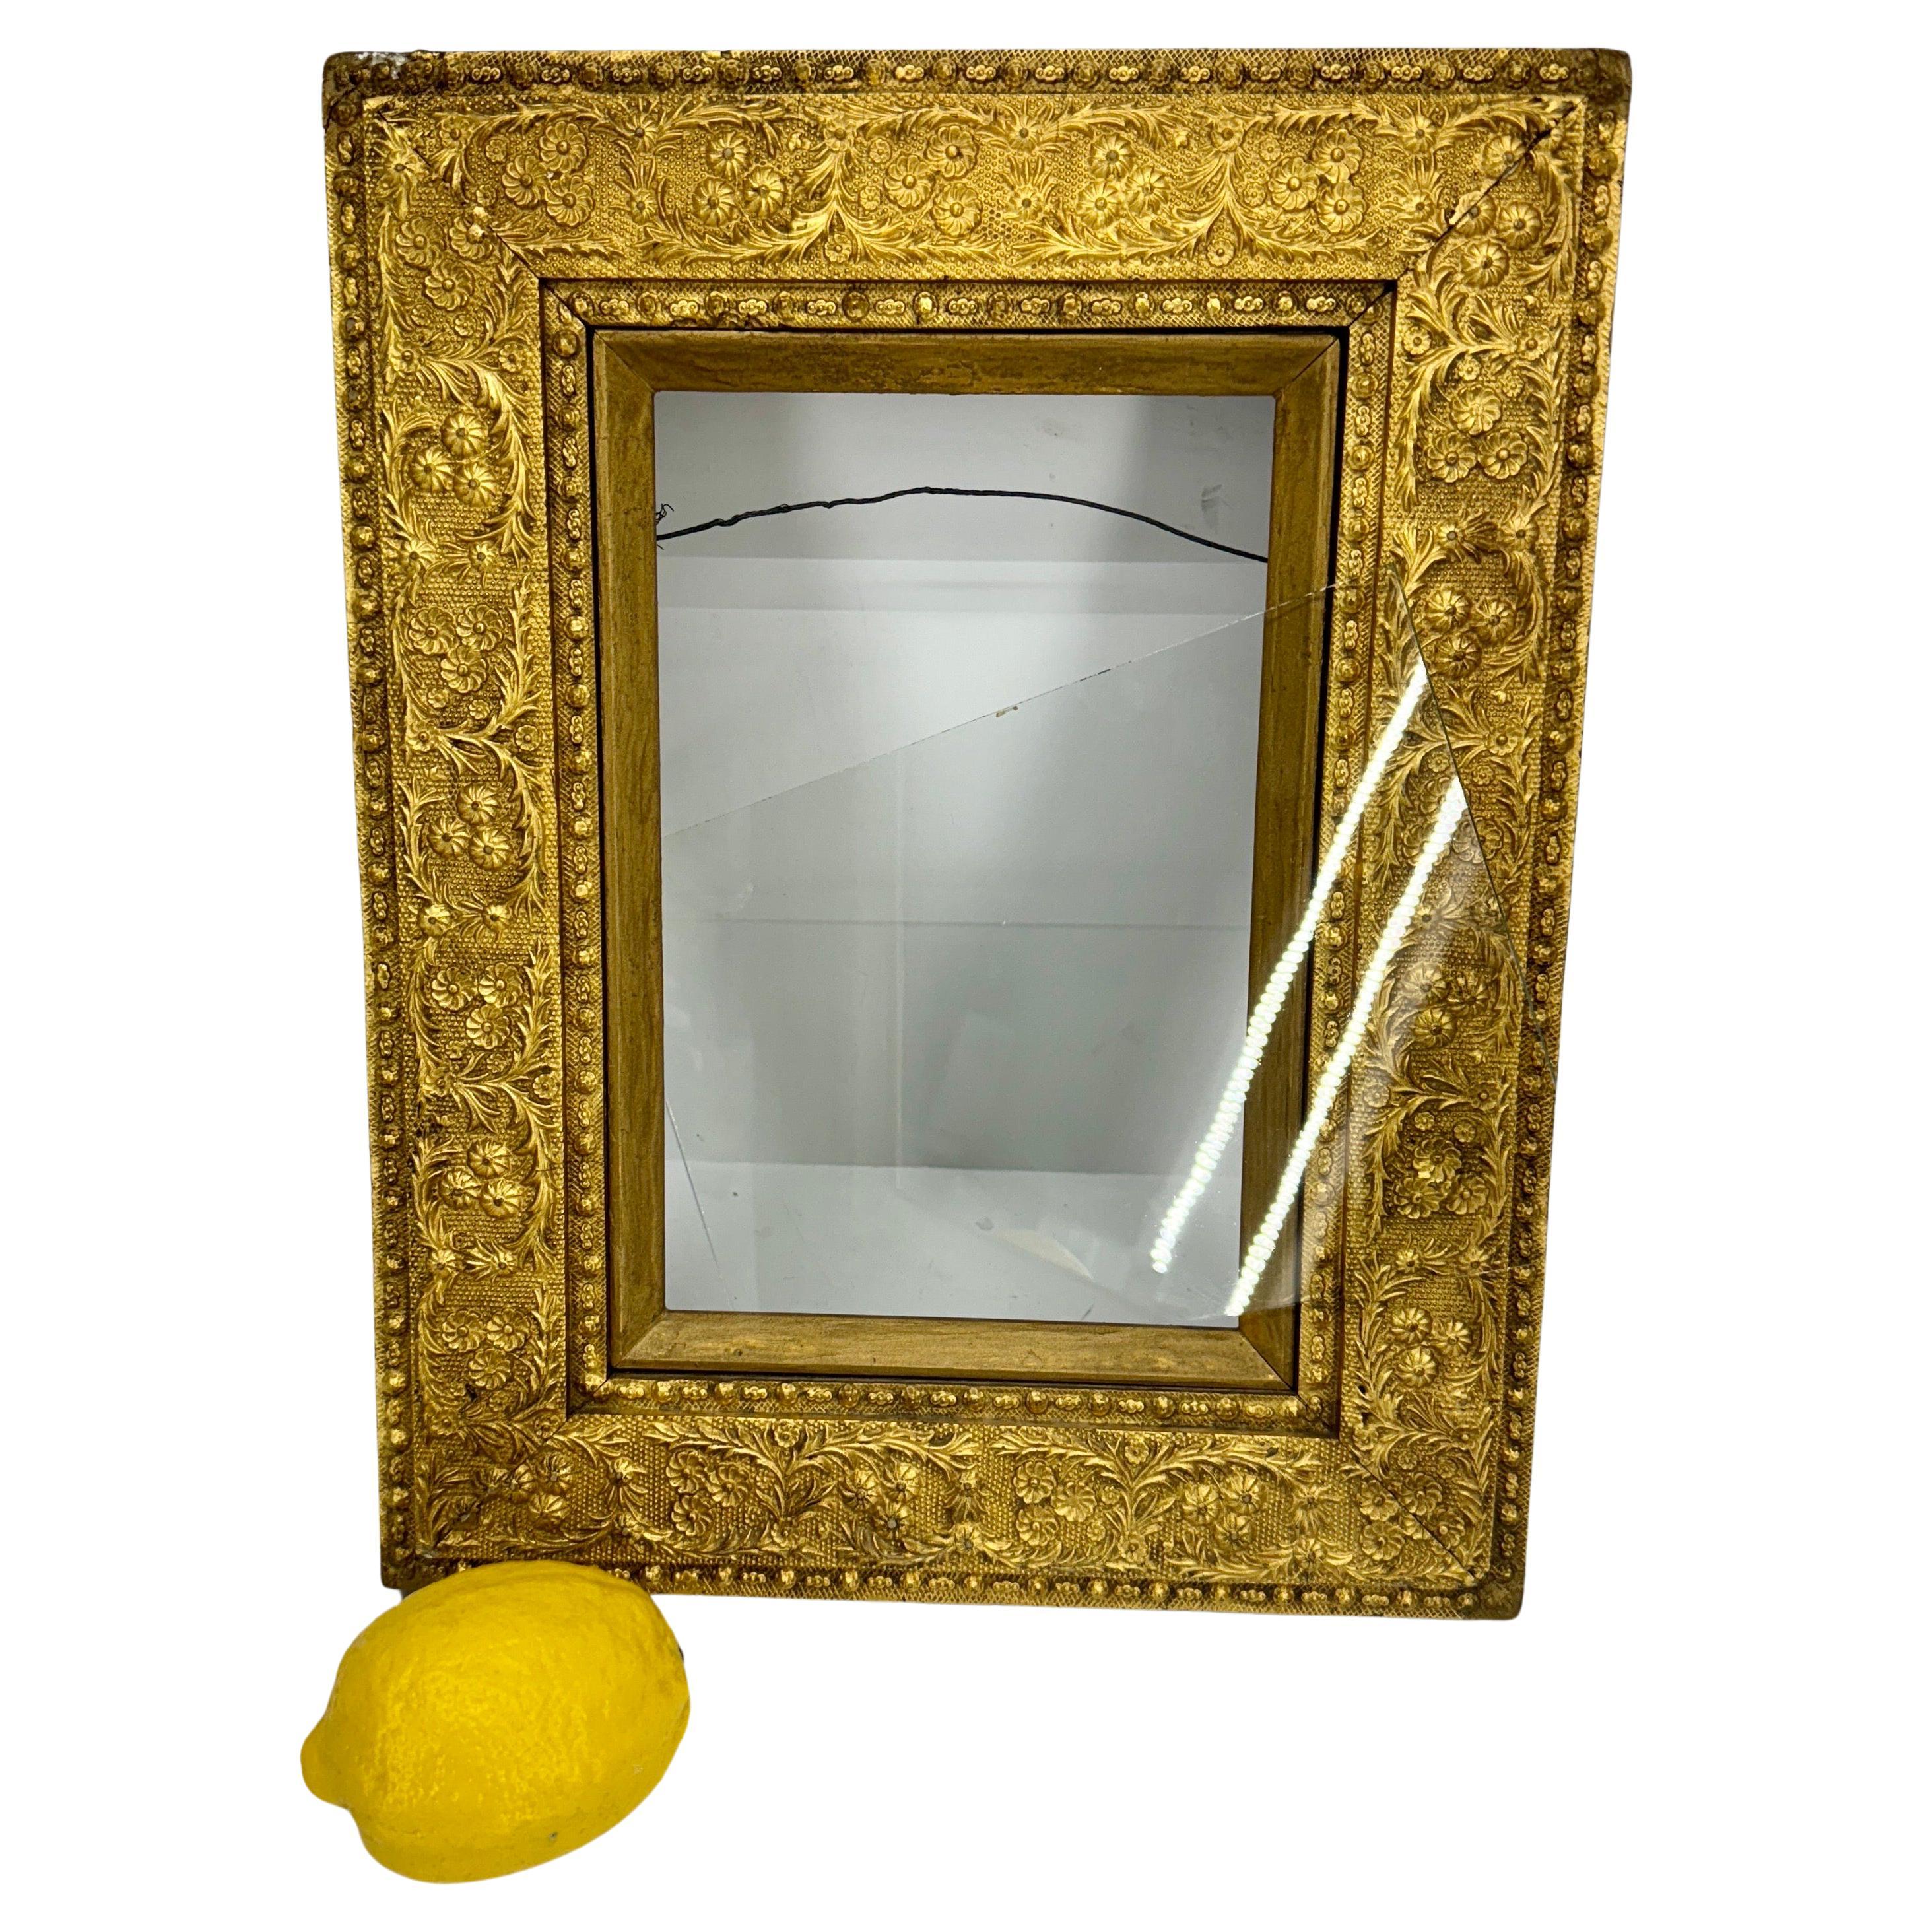 Antique Rectangular Gilded Frame, Italy Late 19th Century 
Glass is included
Inside measurements are  6 by 9 inches.